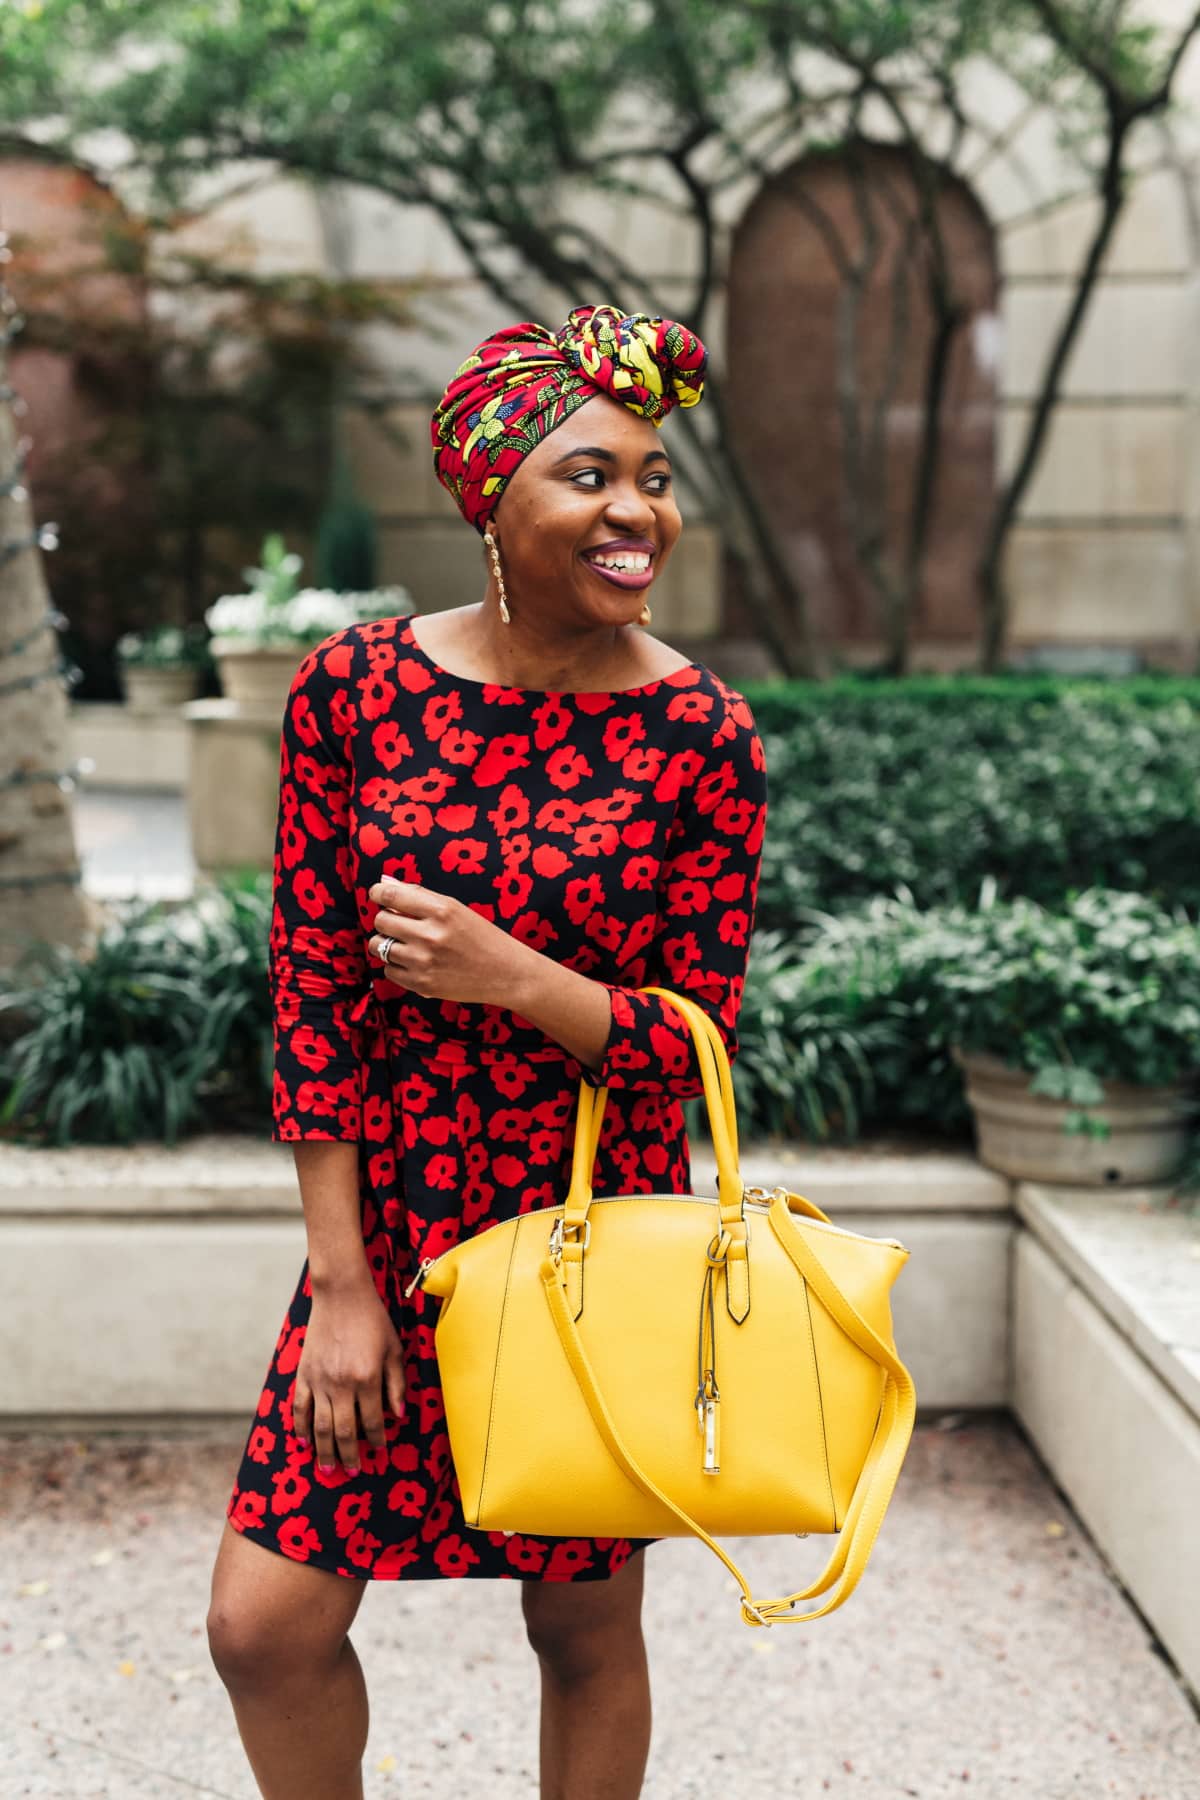 Did you know that African head wraps can be style in a plethora of ways? Yes! African print lover and deal seeker shows us where she shops for the best and most affordable ankara scarves. And some of them ship free! All your favorite styles in one place (+find out where to get them). Click to see all! #africanfashion #kente #turbanstyle